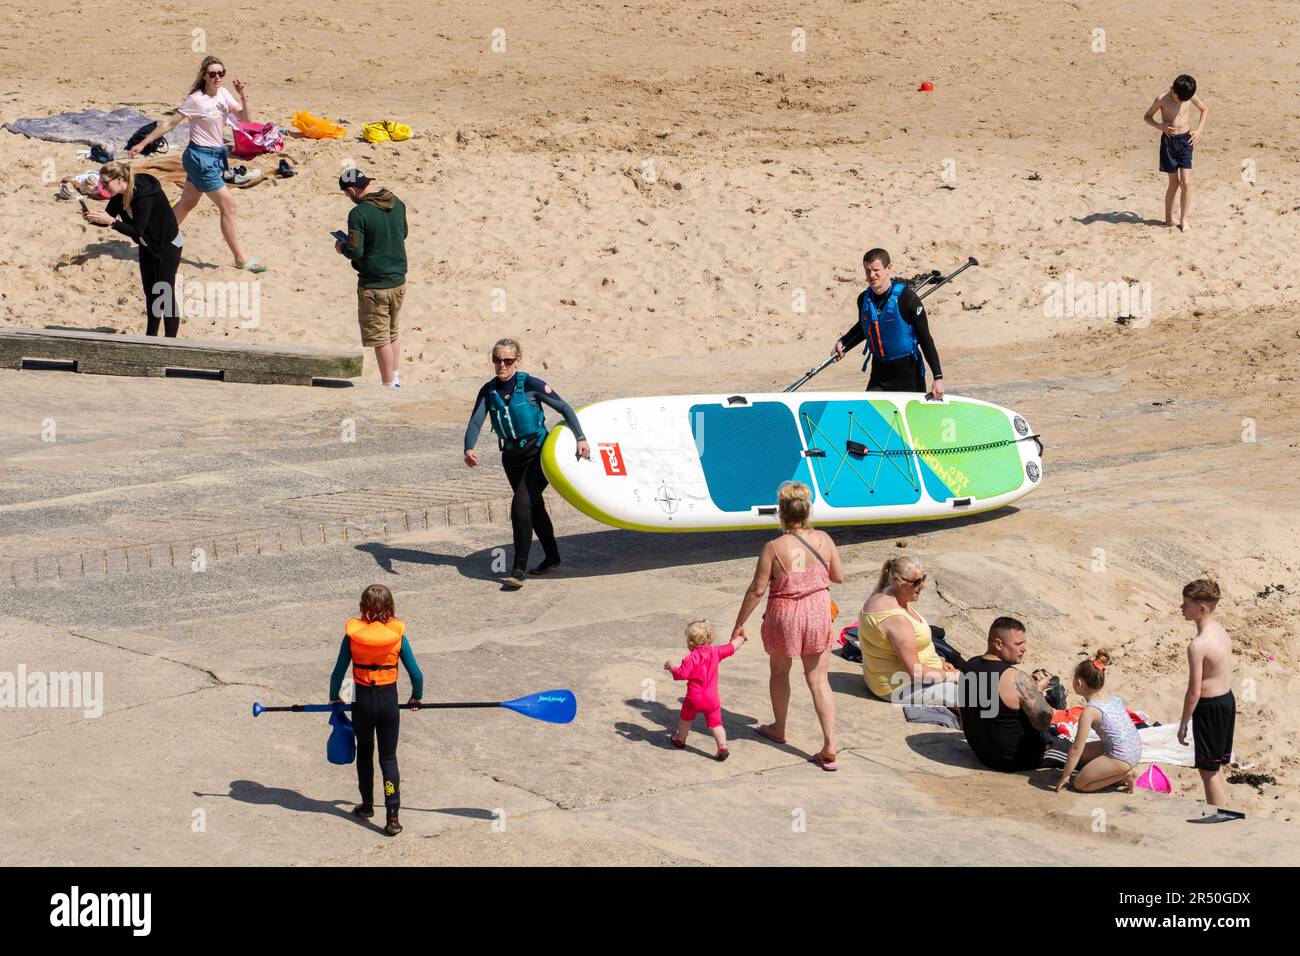 People enjoying the beach in sunny weather, including stand up paddleboarders with their board. Cullercoats Bay, North Tyneside, UK Stock Photo